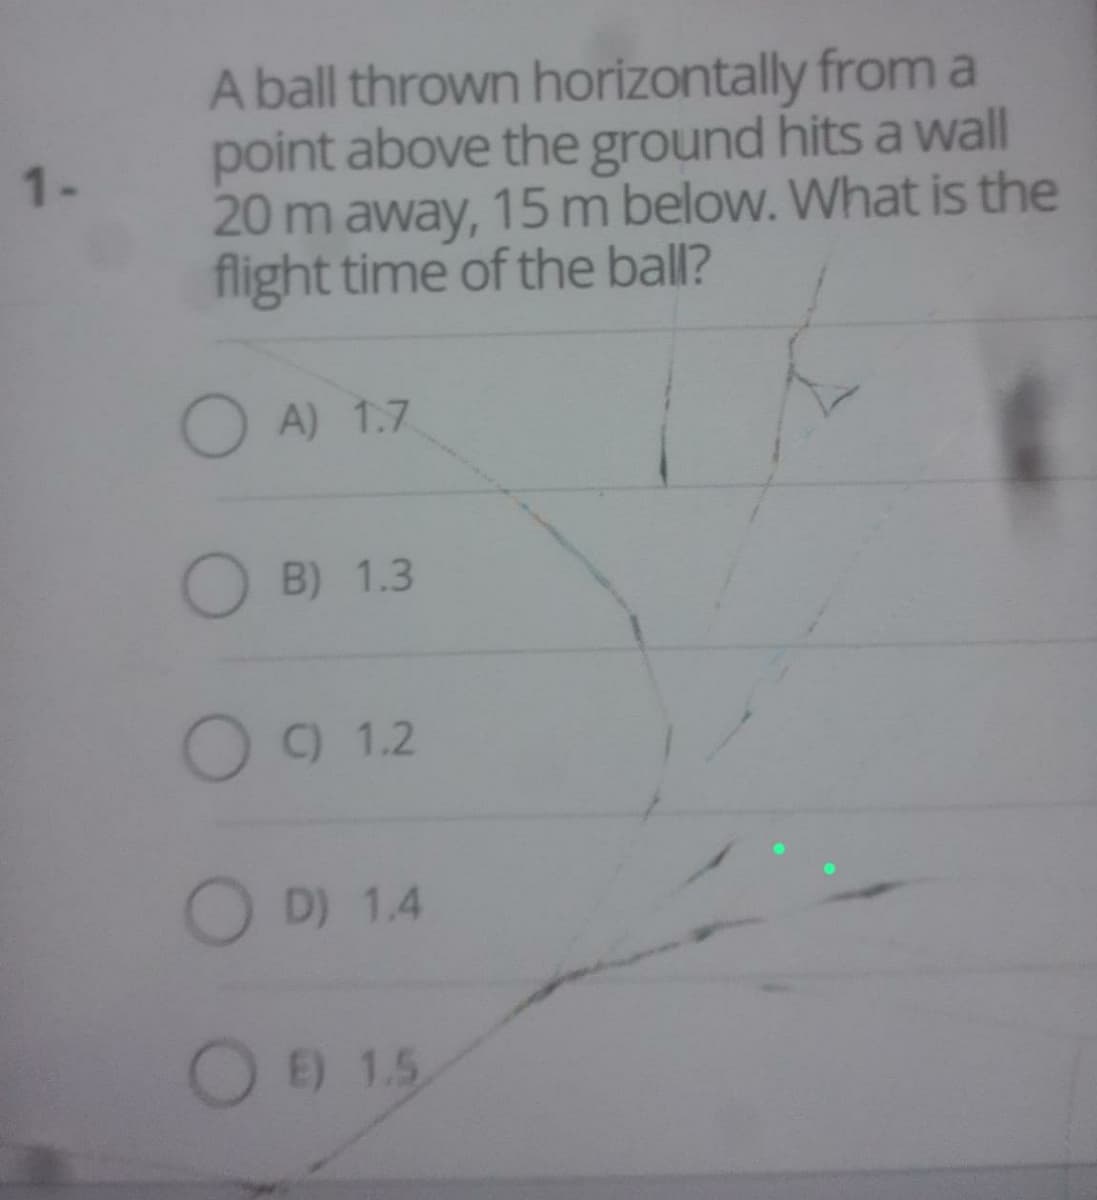 1-
A ball thrown horizontally from a
point above the ground hits a wall
20 m away, 15 m below. What is the
flight time of the ball?
A) 1.7
B) 1.3
O C) 1.2
OD) 1.4
OE) 1.5